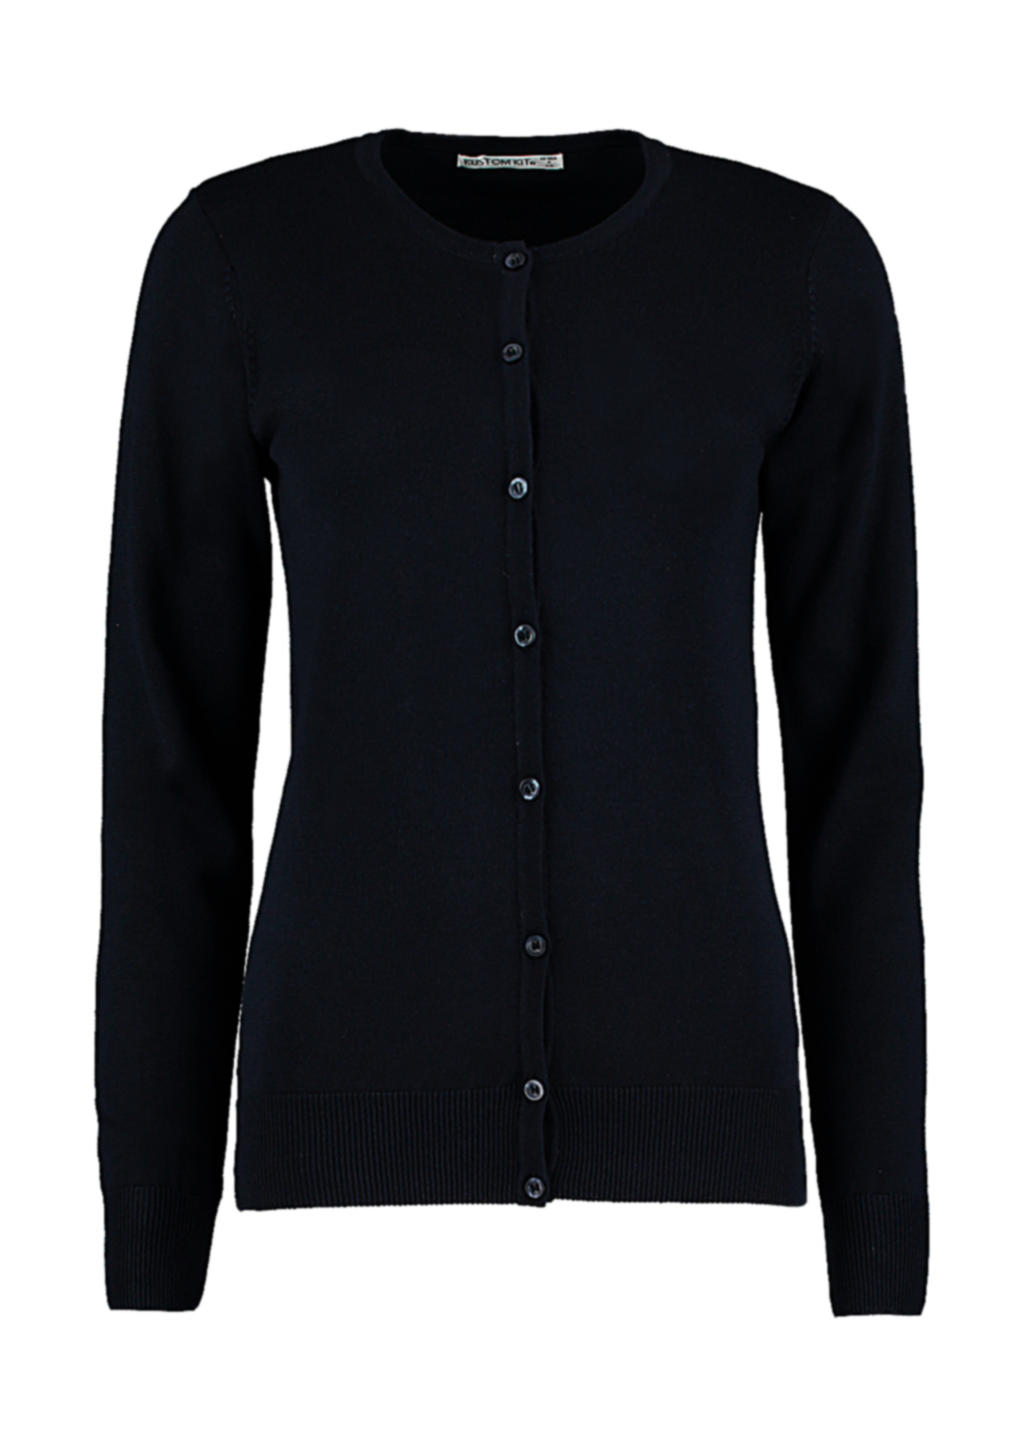  Womens Classic Fit Arundel Crew Neck Cardigan in Farbe Navy